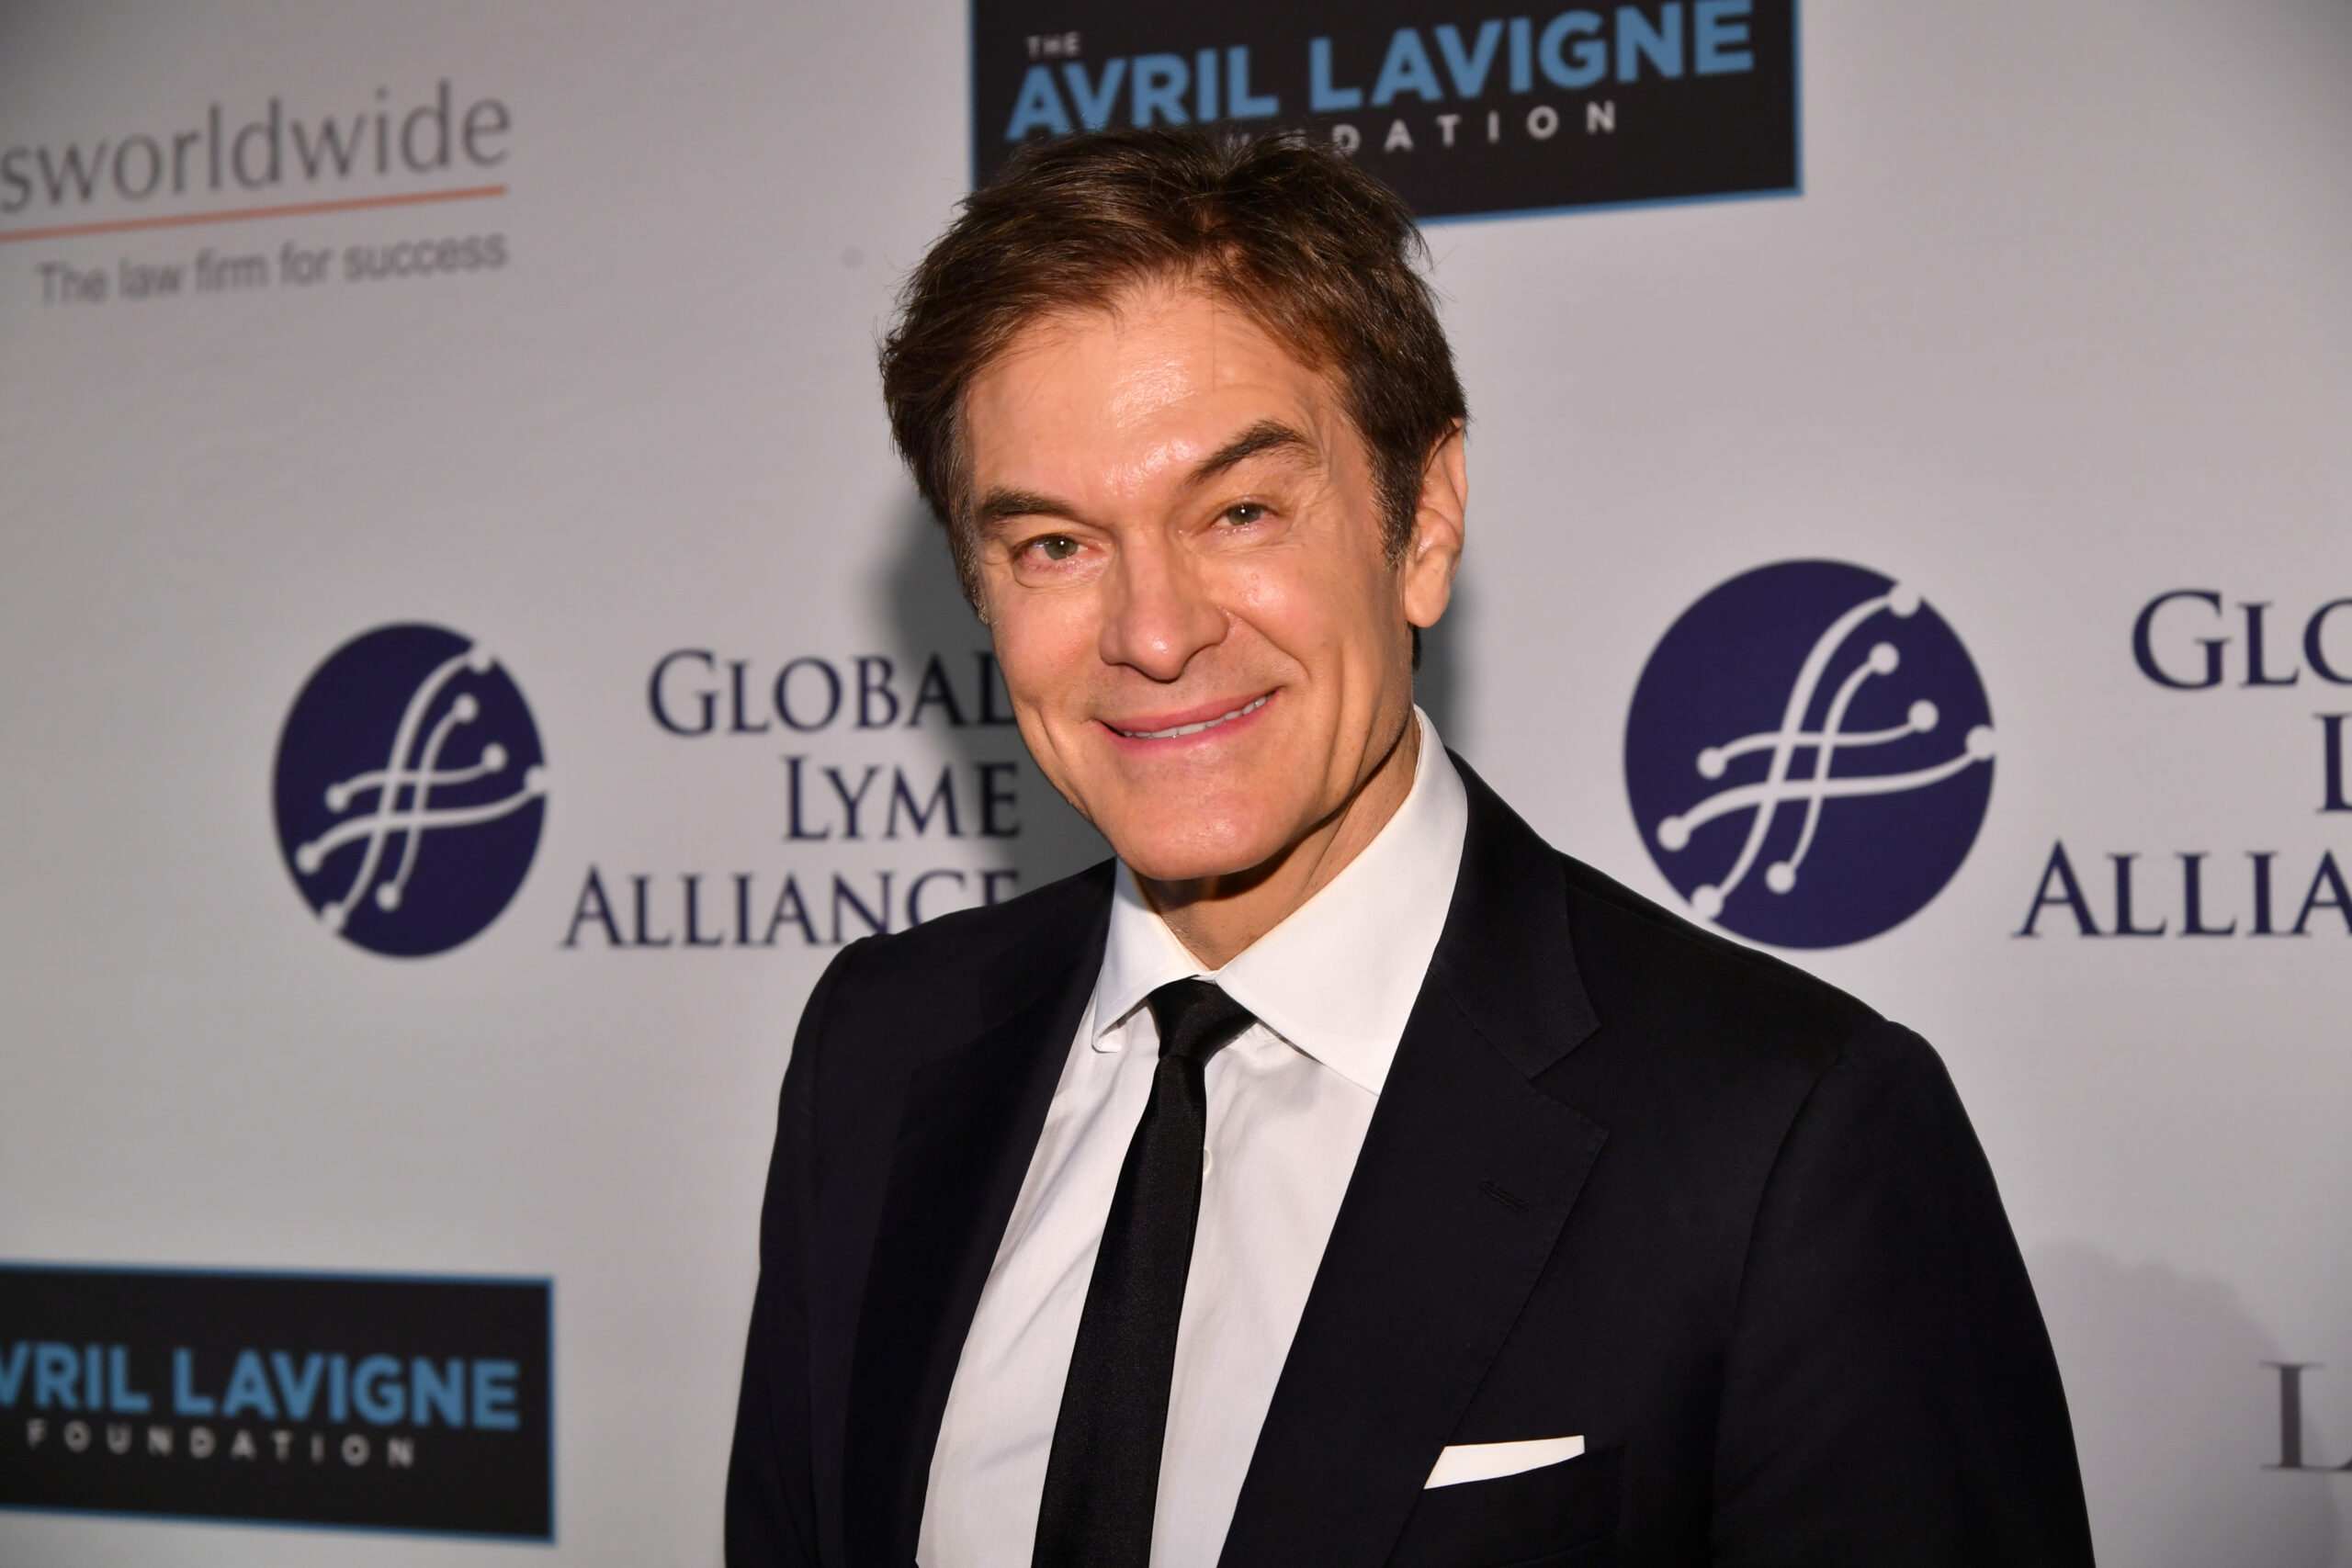 Dr. Oz Is Running for Senate in Pennsylvania, But Doesn’t Seem to Live There